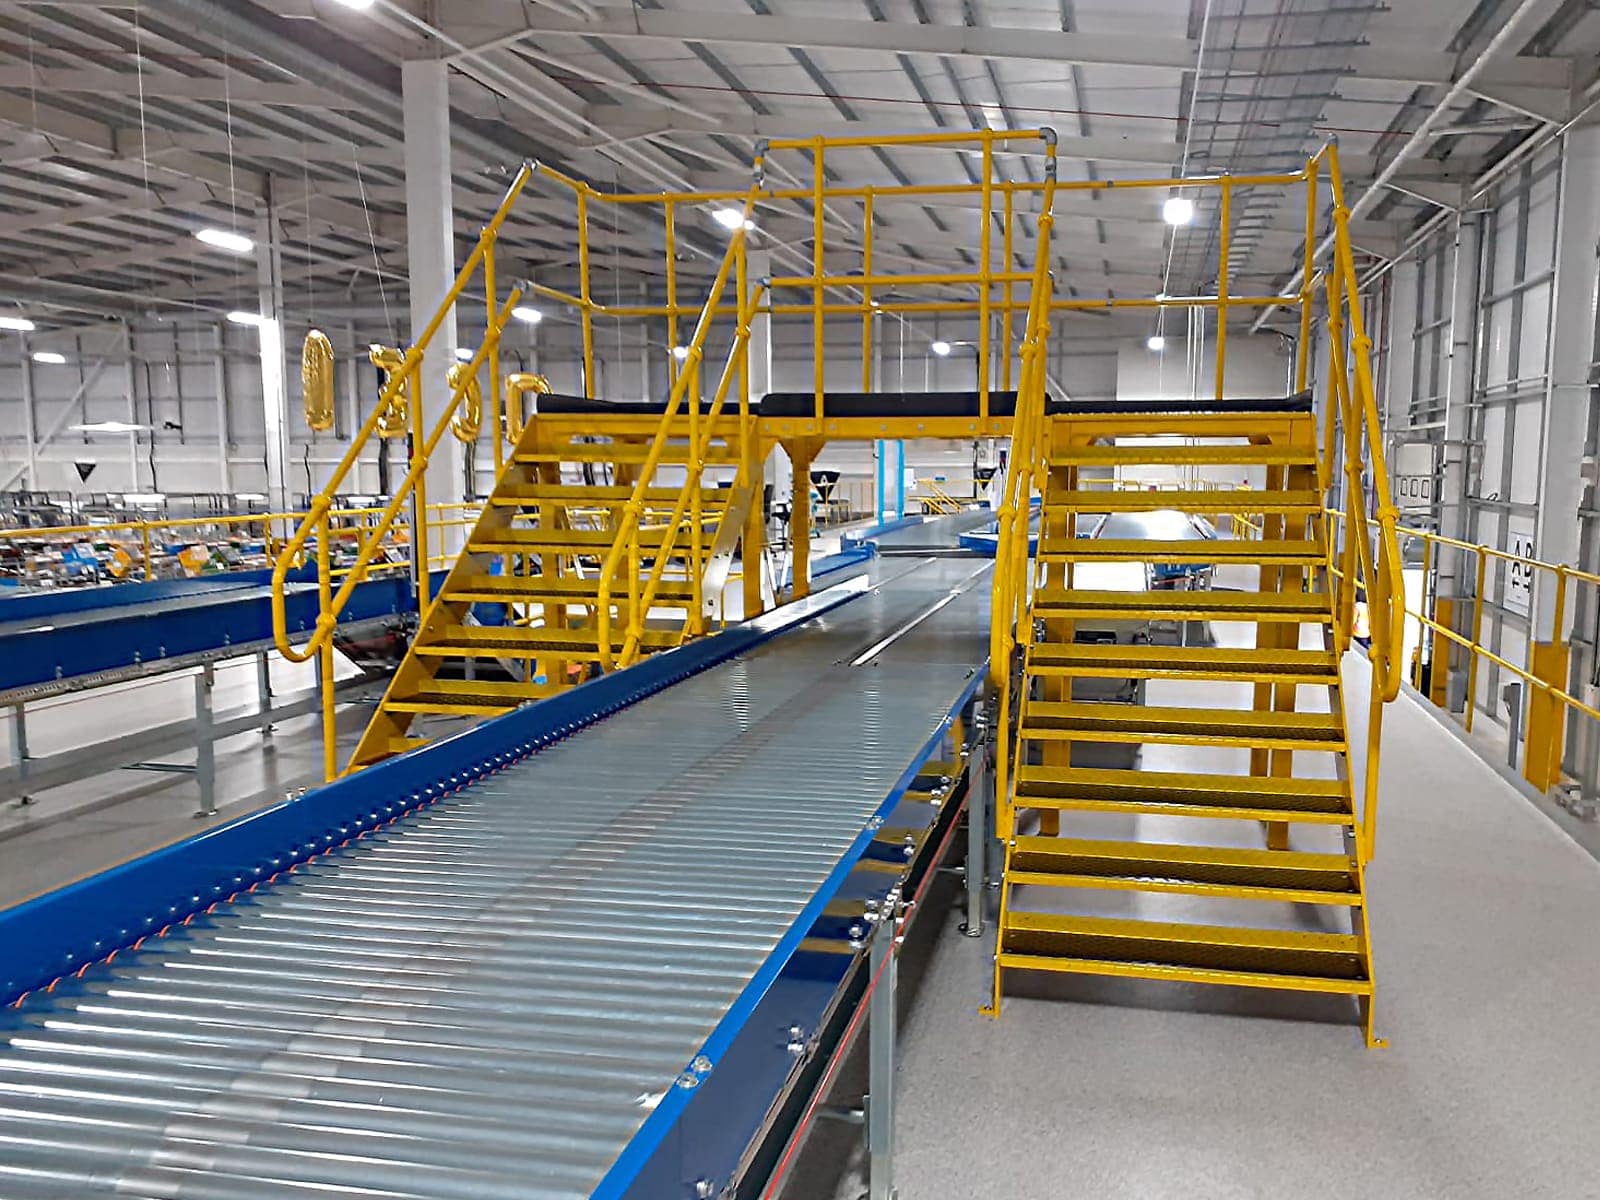 Guide to conveyors across industries